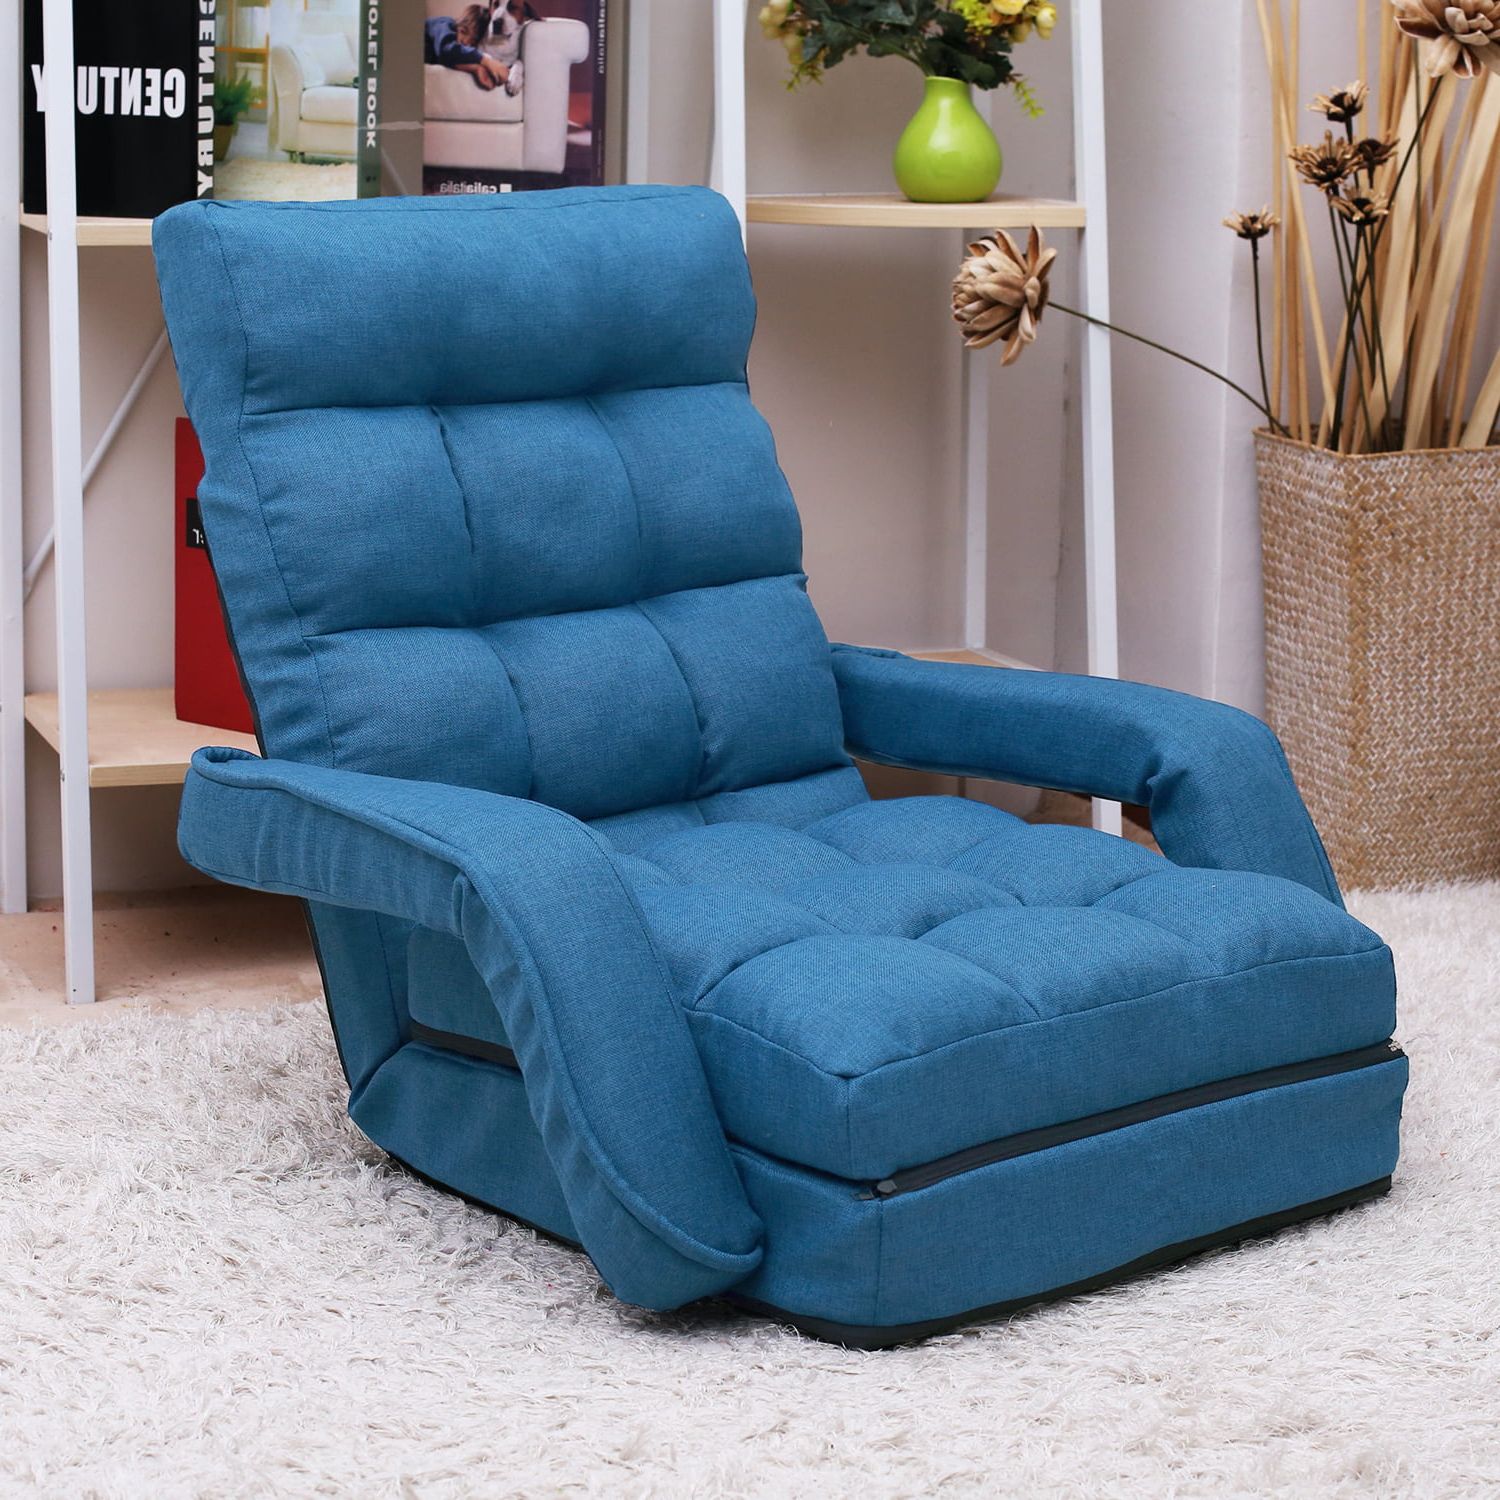 Current 2 In 1 Foldable Sofas Within Furniture 2 In 1 Folding Lazy Sofa Lounger Floor Gaming Armchair Bed (View 11 of 15)